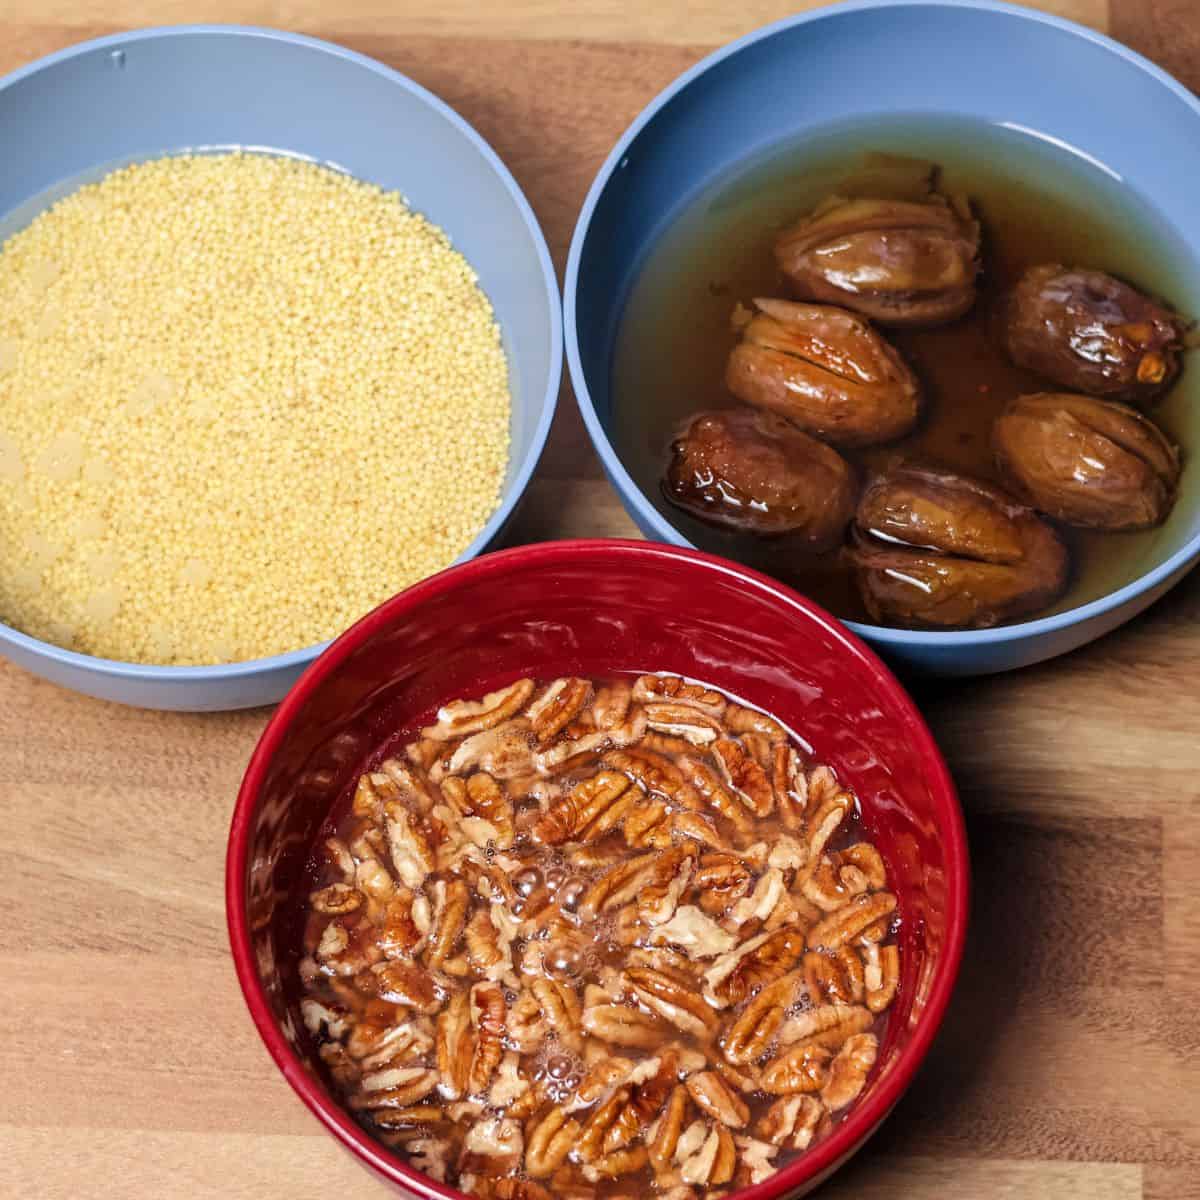 A photograph displaying three bowls: one with yellow millet grains, one with brown Medjool dates in water, and another with pecans in water.